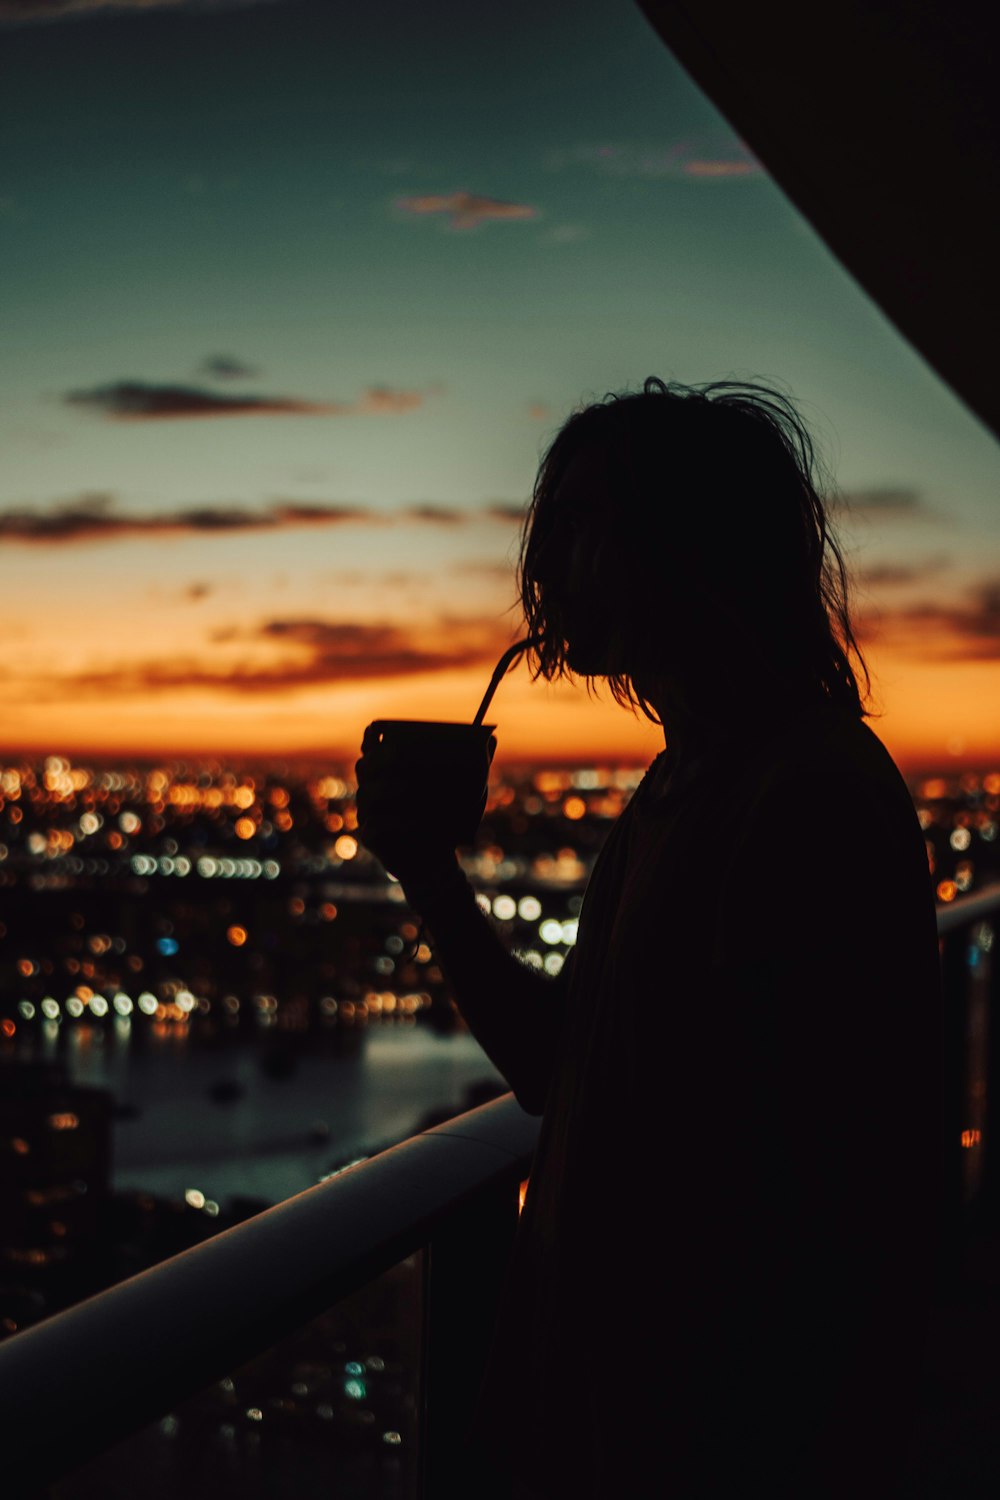 silhouette of person sipping coffee on cup during golden hour